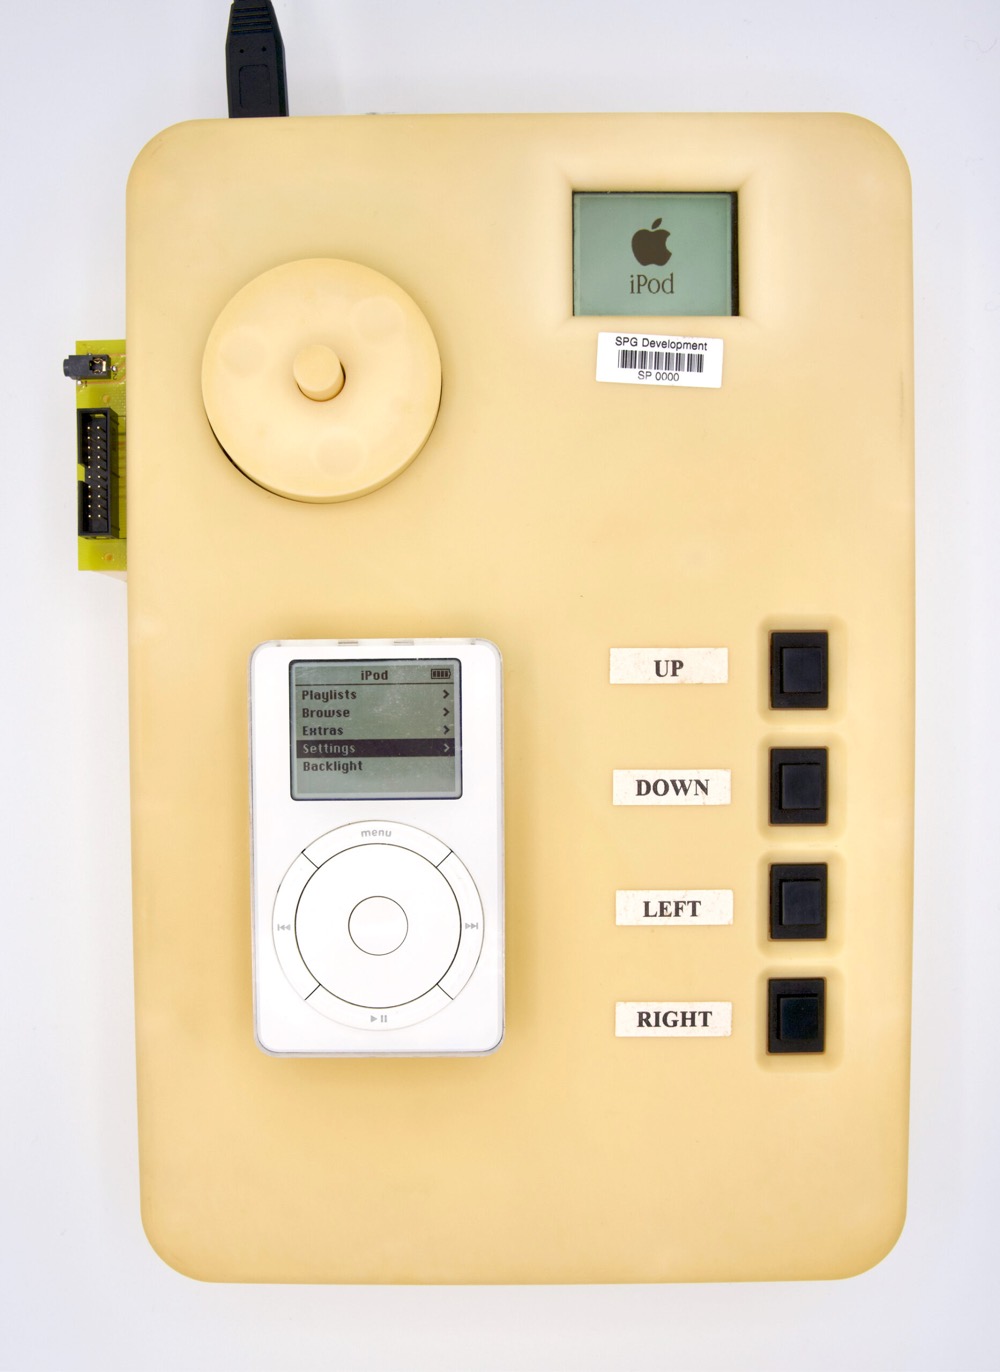 a prototype of the original iPod compared to the original iPod